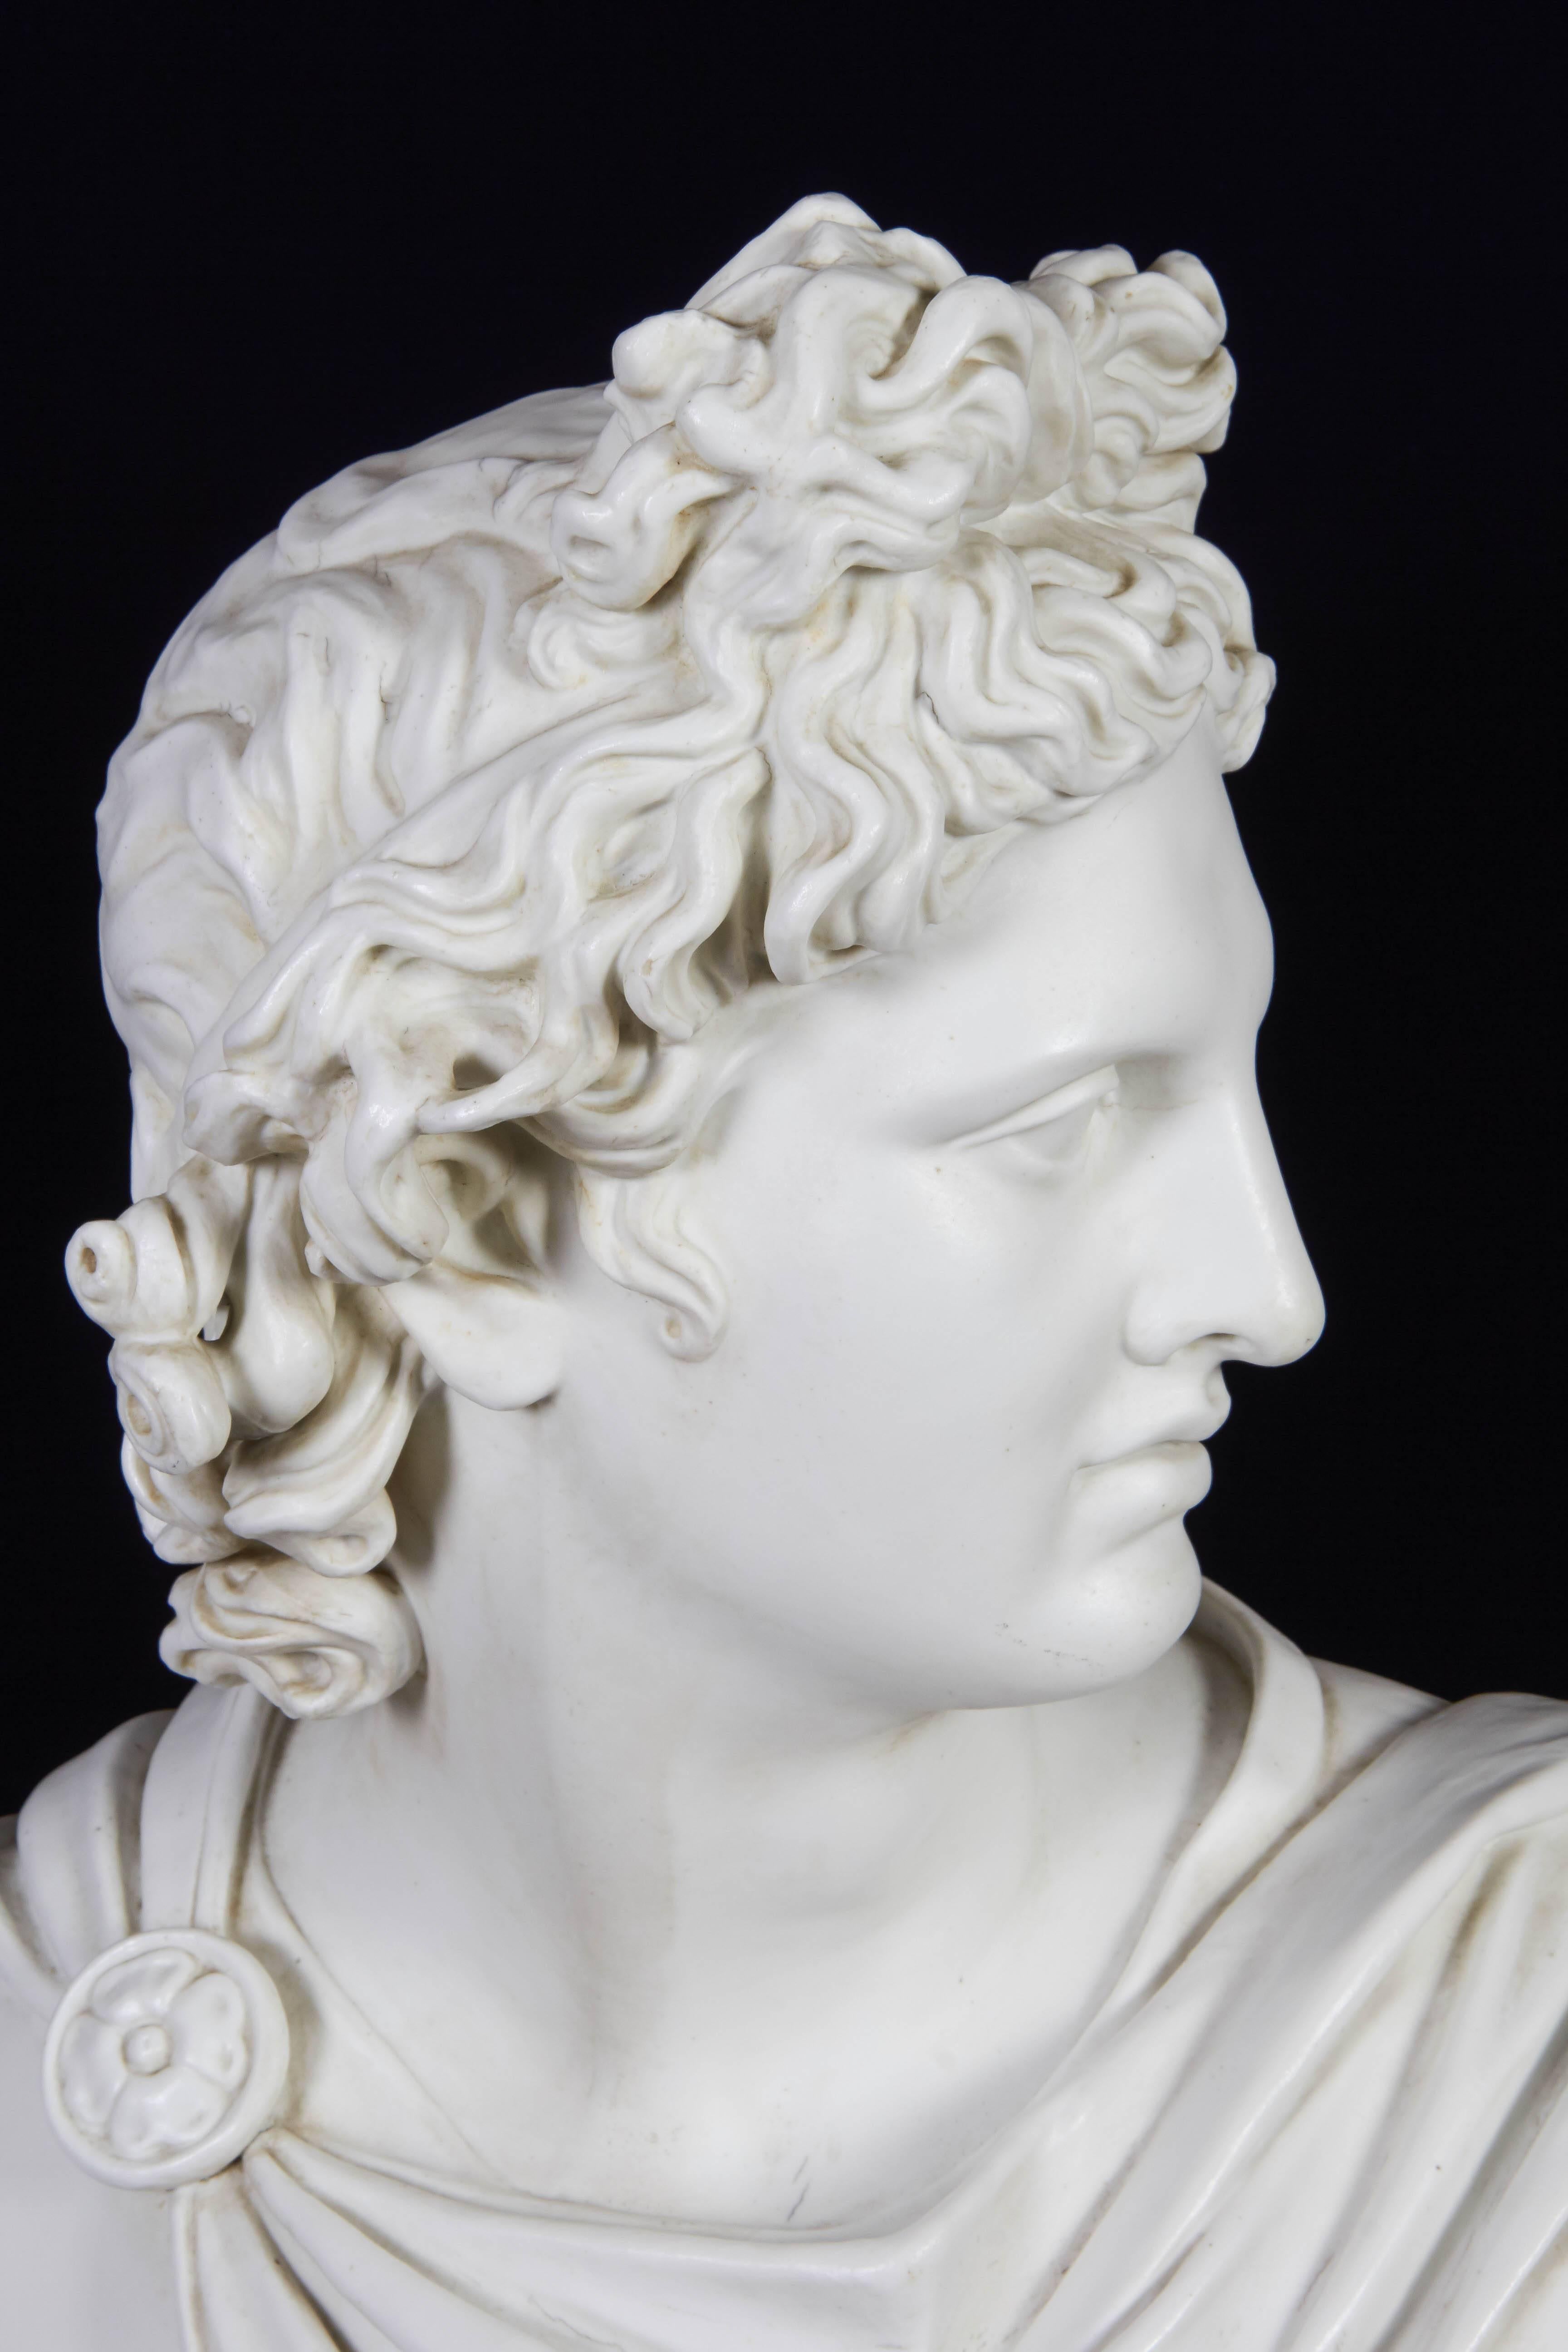 A large and quite impressive antique neoclassical porcelain Bust of Apollo of Belvedere, signed and engraved in the back. French mid-1800s.

Measures: Height: 26